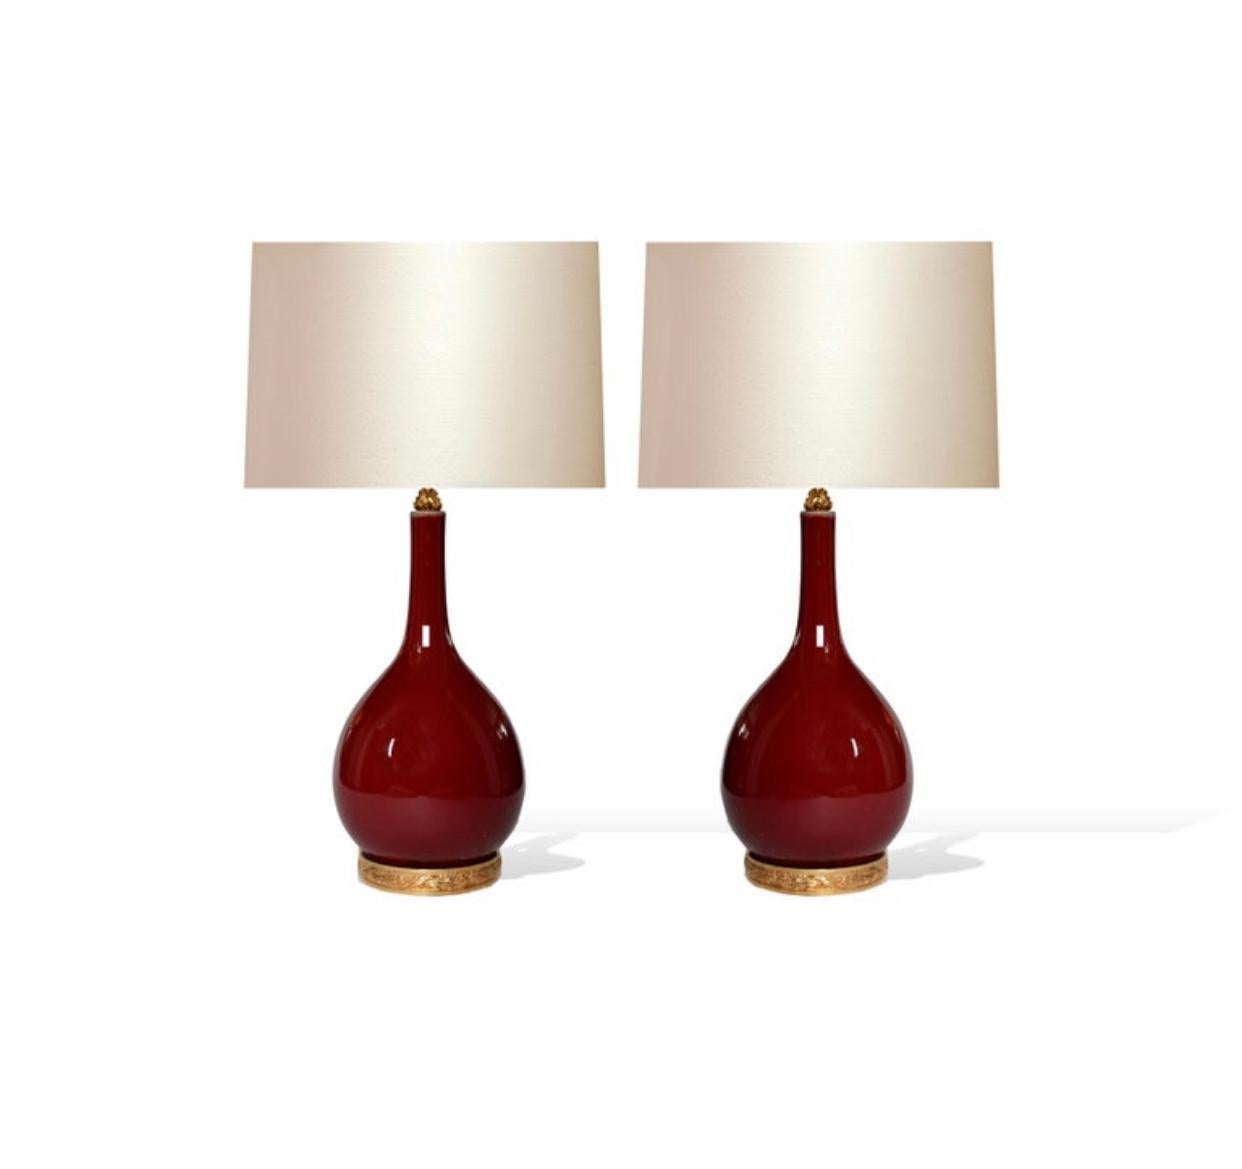 Pair of oxblood glazed porcelain lamps with gilt brass bases,
Each lamp installed two sockets, e26 bases, to the top of the porcelain 21 inch.